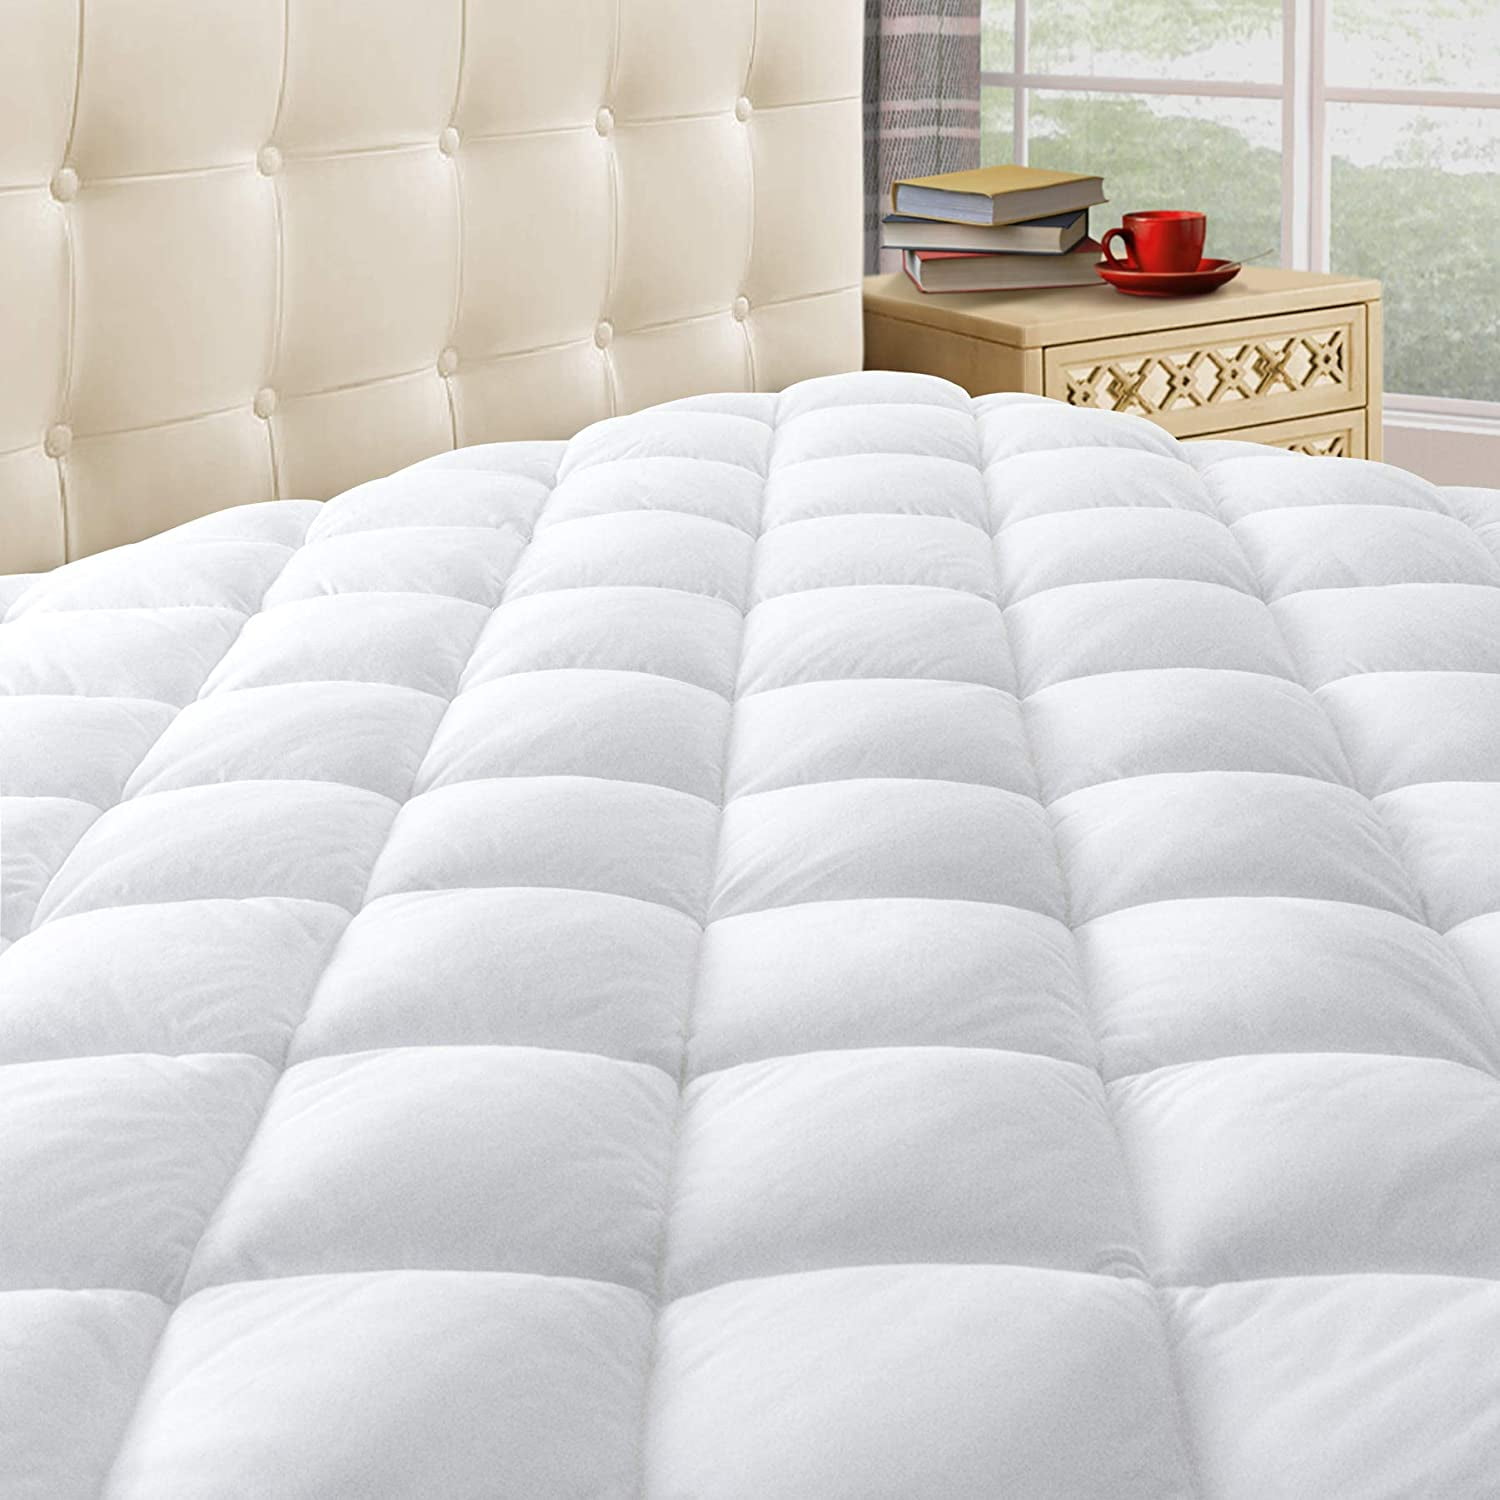 Mattress Pad Cover Hypoallergenic Topper Quilted Fitted Sheet Protector King US 